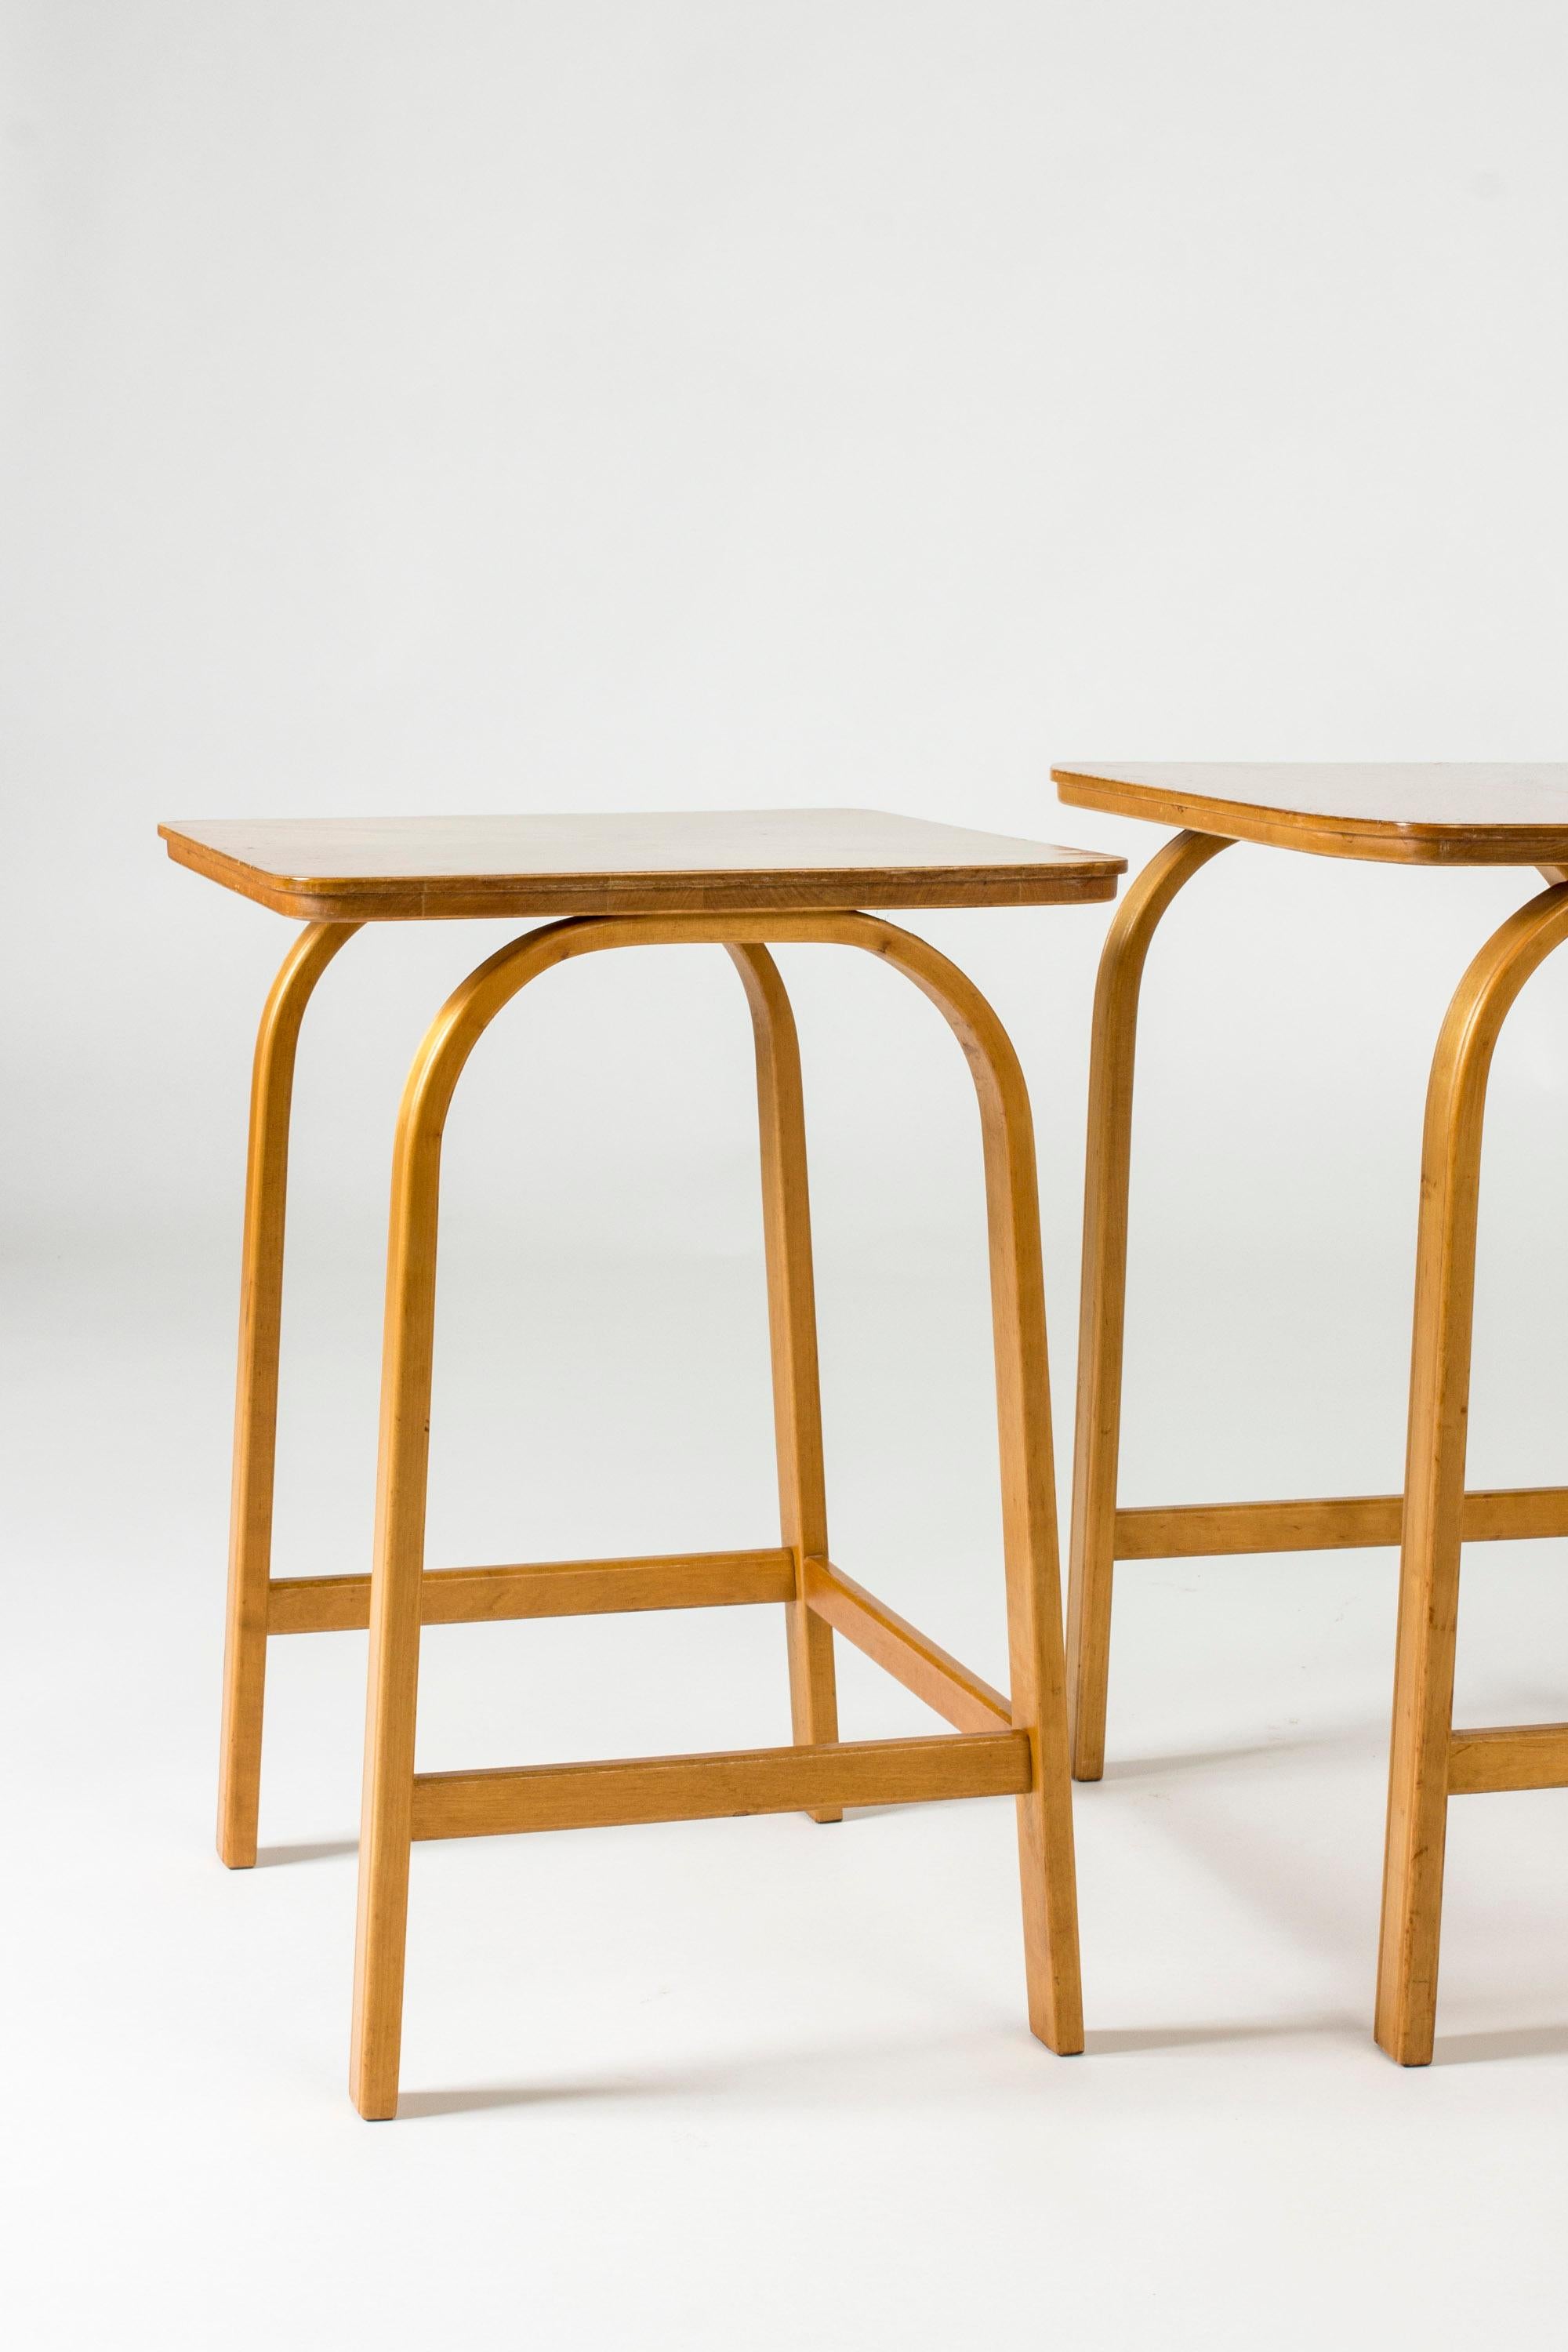 Modernist Birch Nesting Tables by Axel Larsson, Sweden, 1930s In Good Condition For Sale In Stockholm, SE